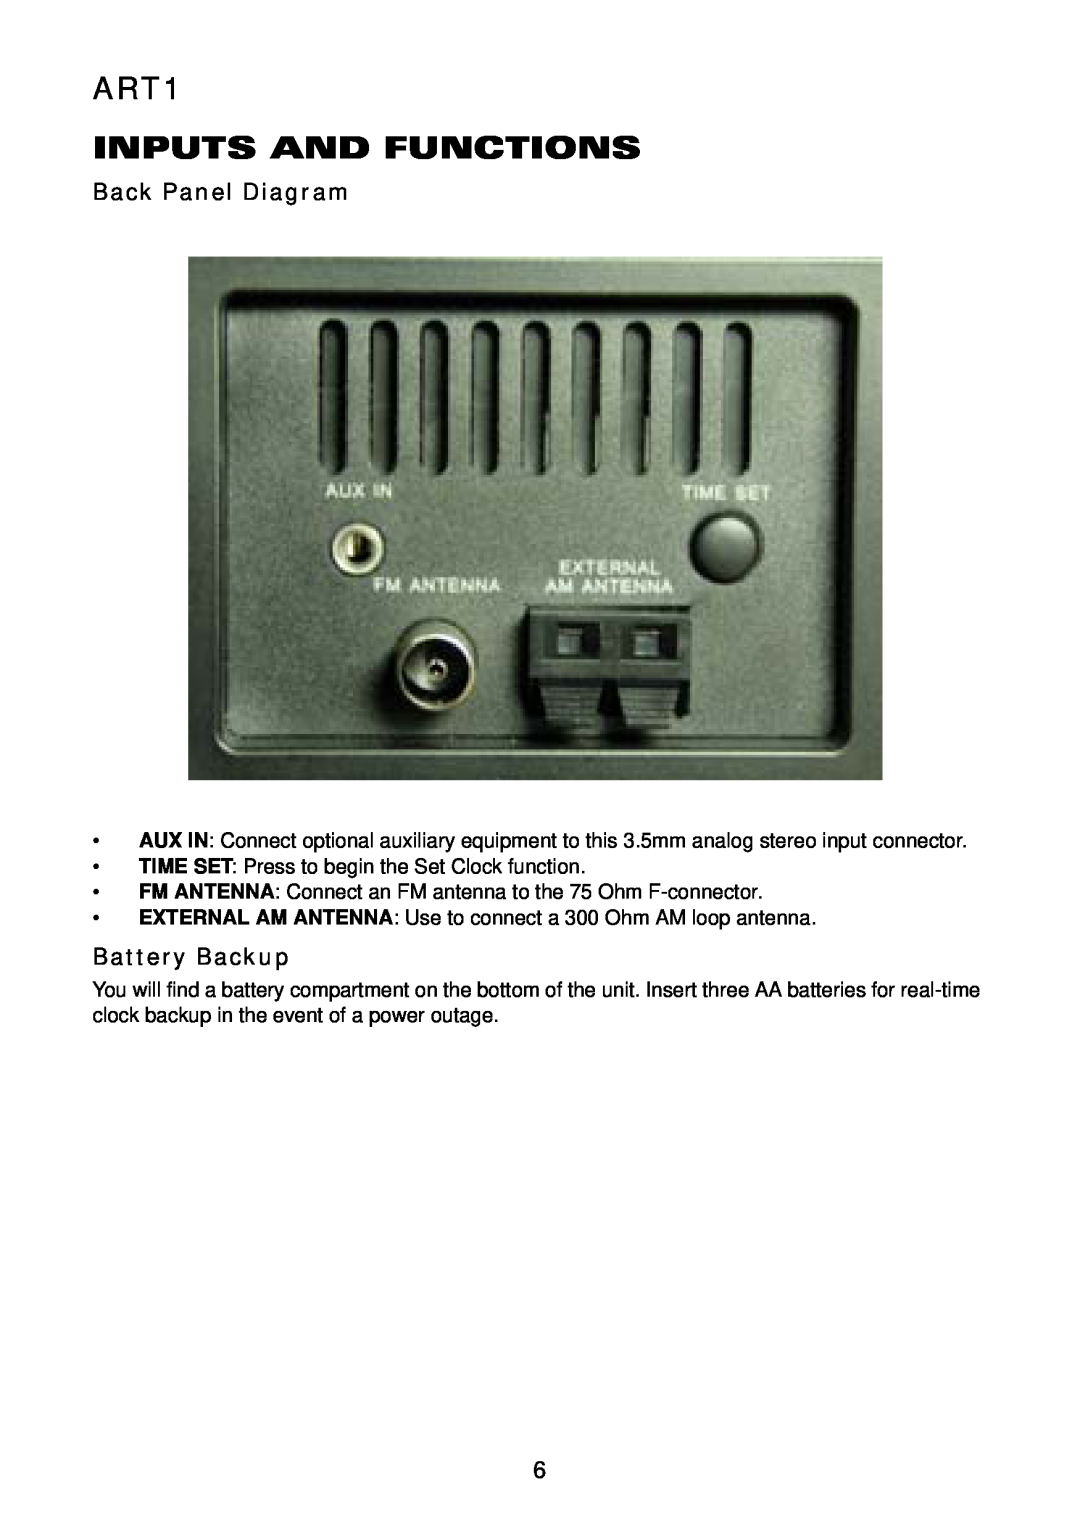 Acoustic Research owner manual ART1 INPUTS AND FUNCTIONS, Back Panel Diagram, Battery Backup 